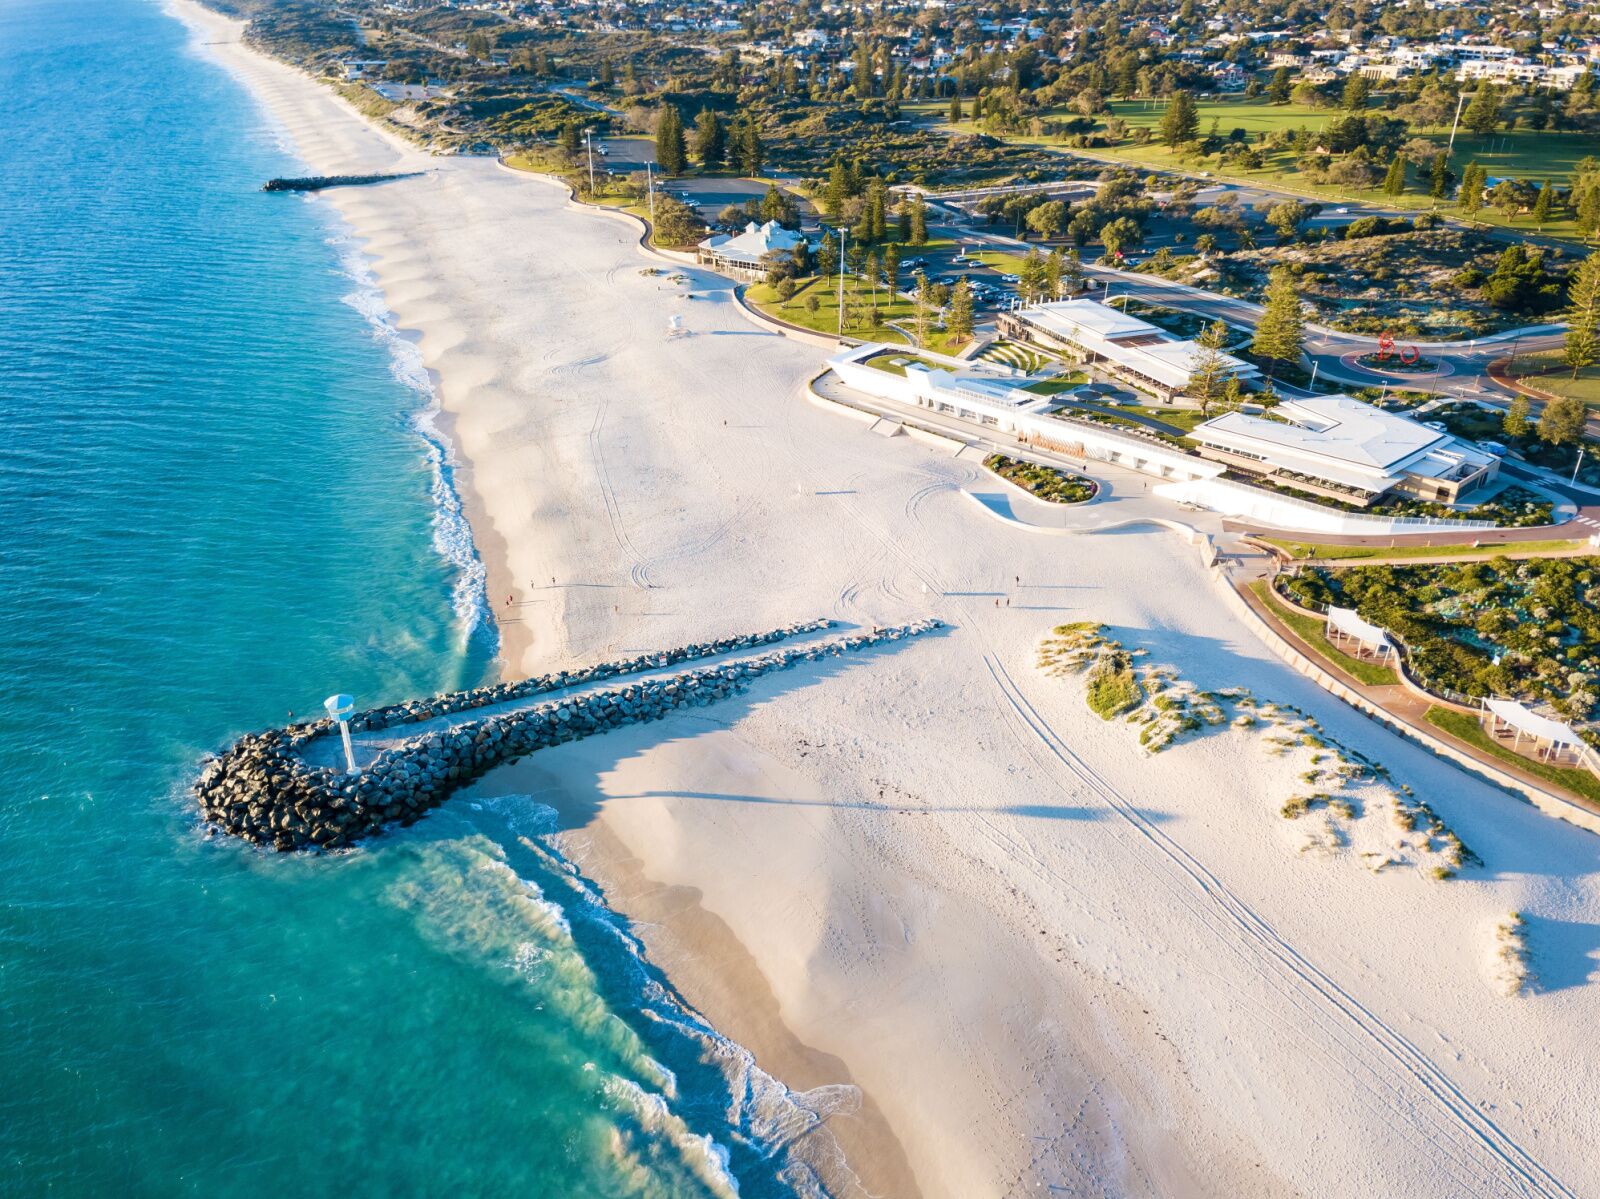 best parks in perth - city beach aerial